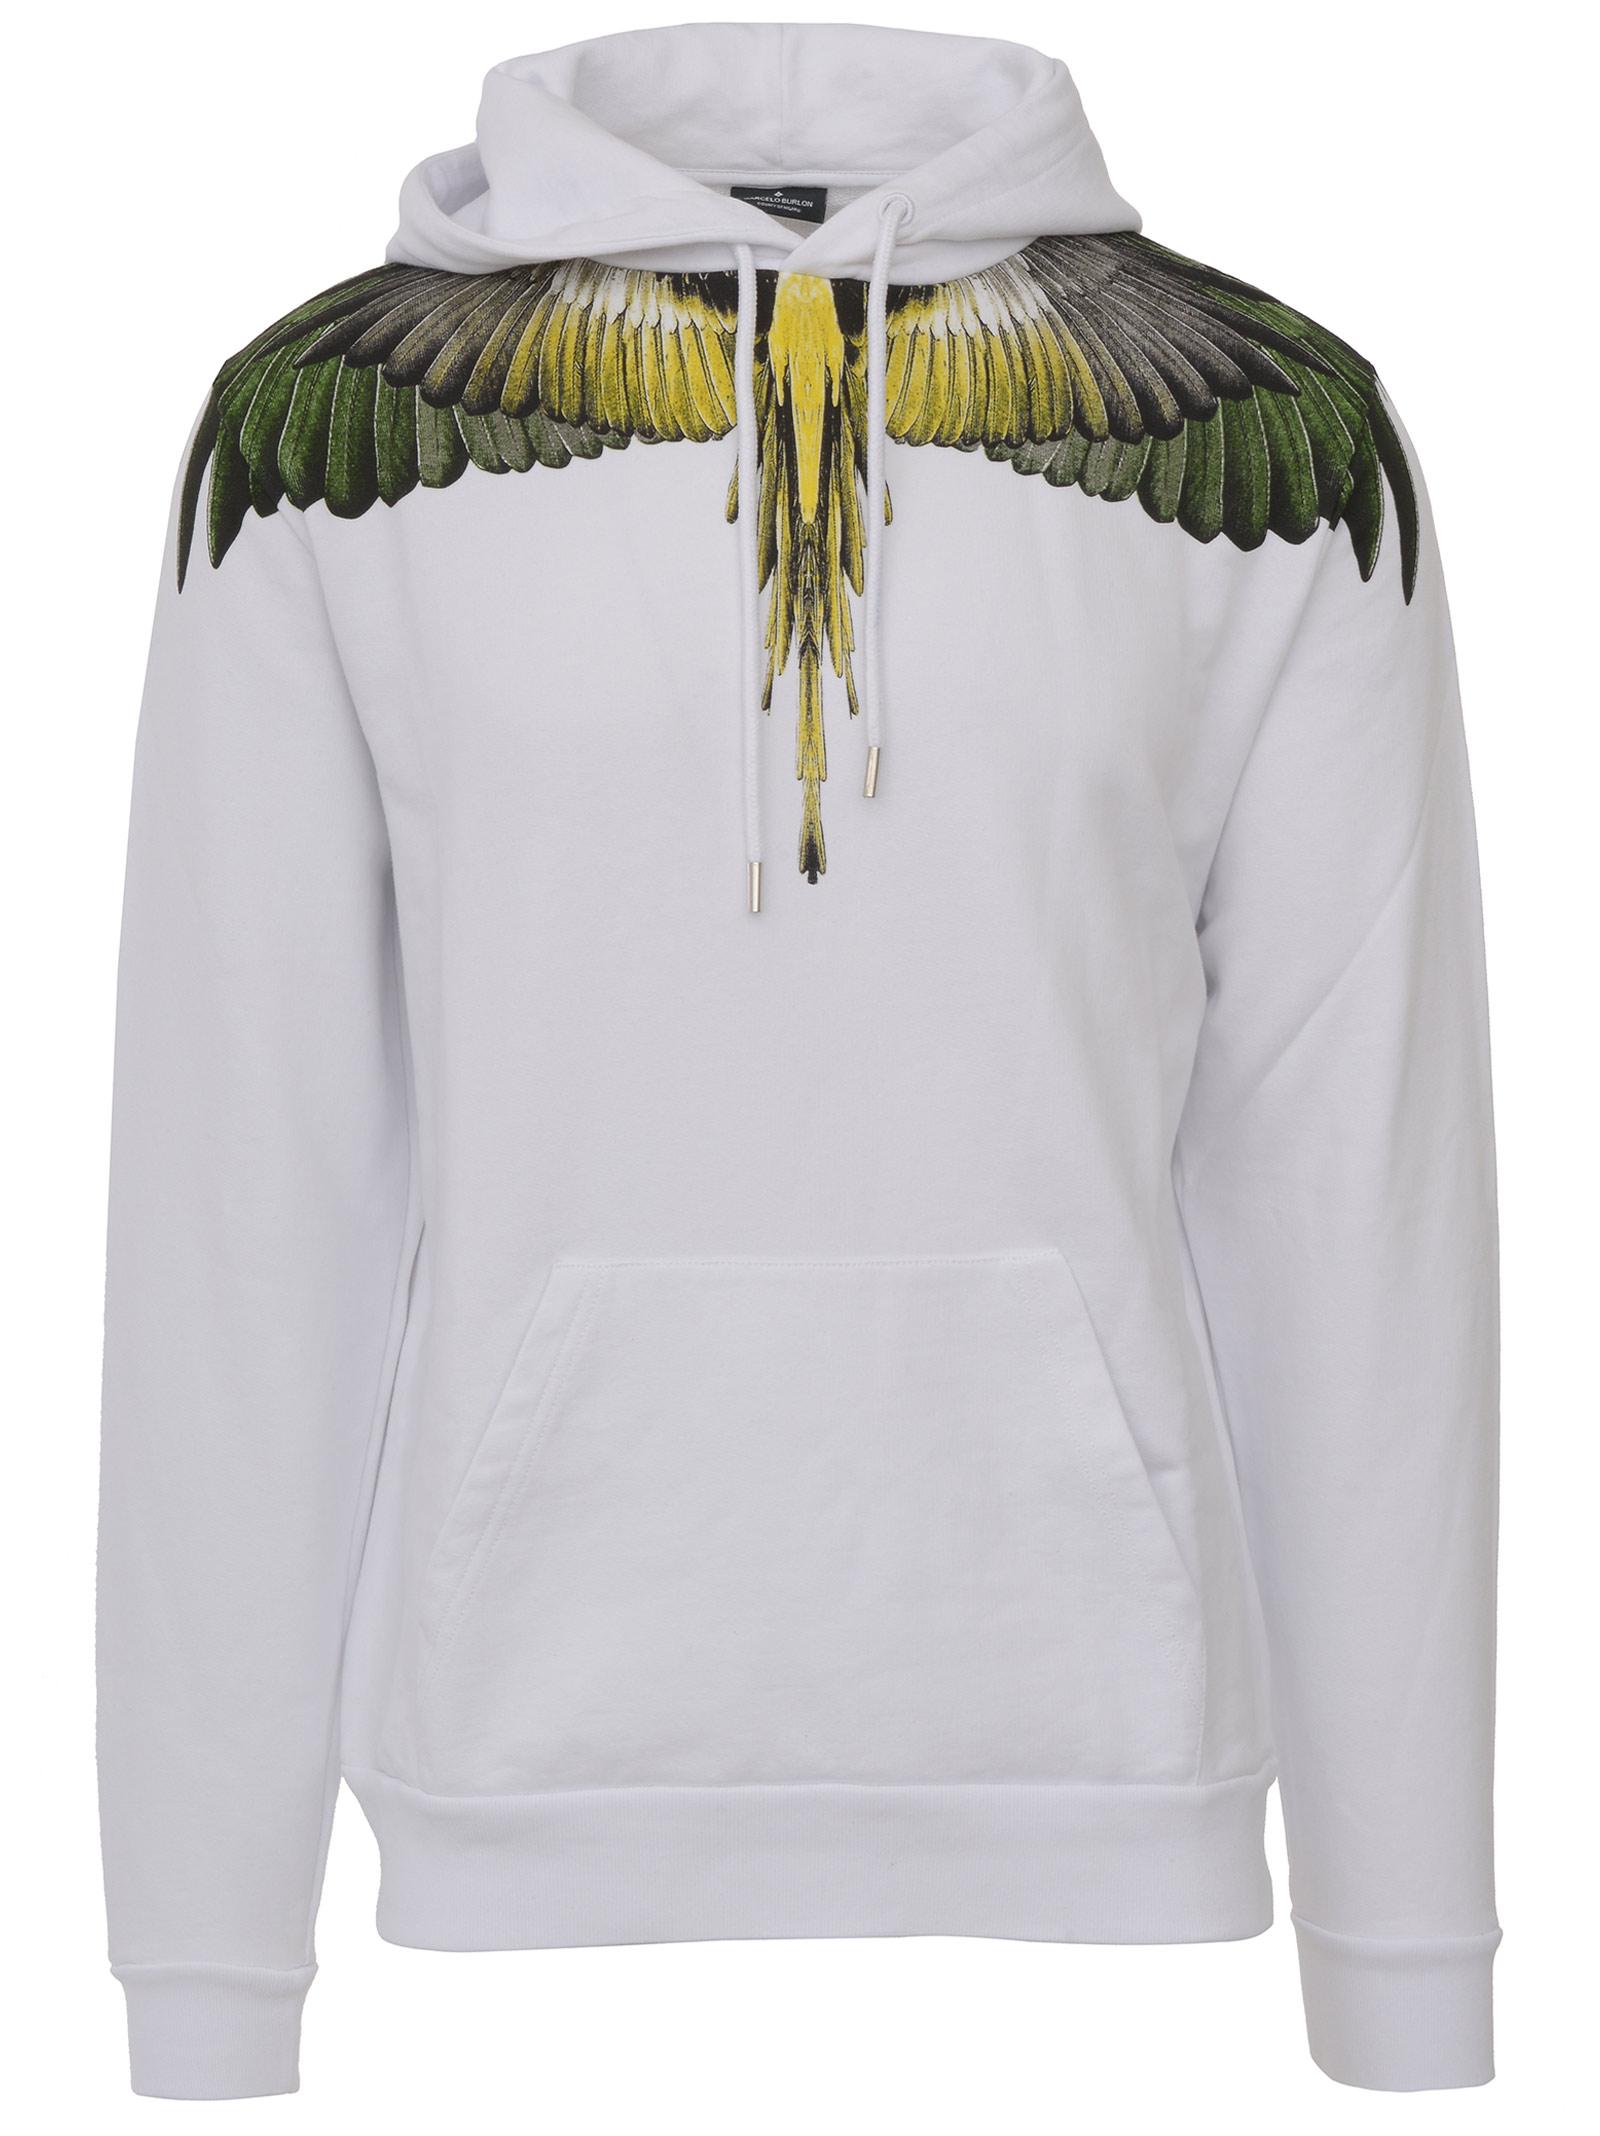 Marcelo Burlon Cotton Yellow Wings White Sweatshirt With Hood And Colored  Print On The Shoulders. for Men - Lyst